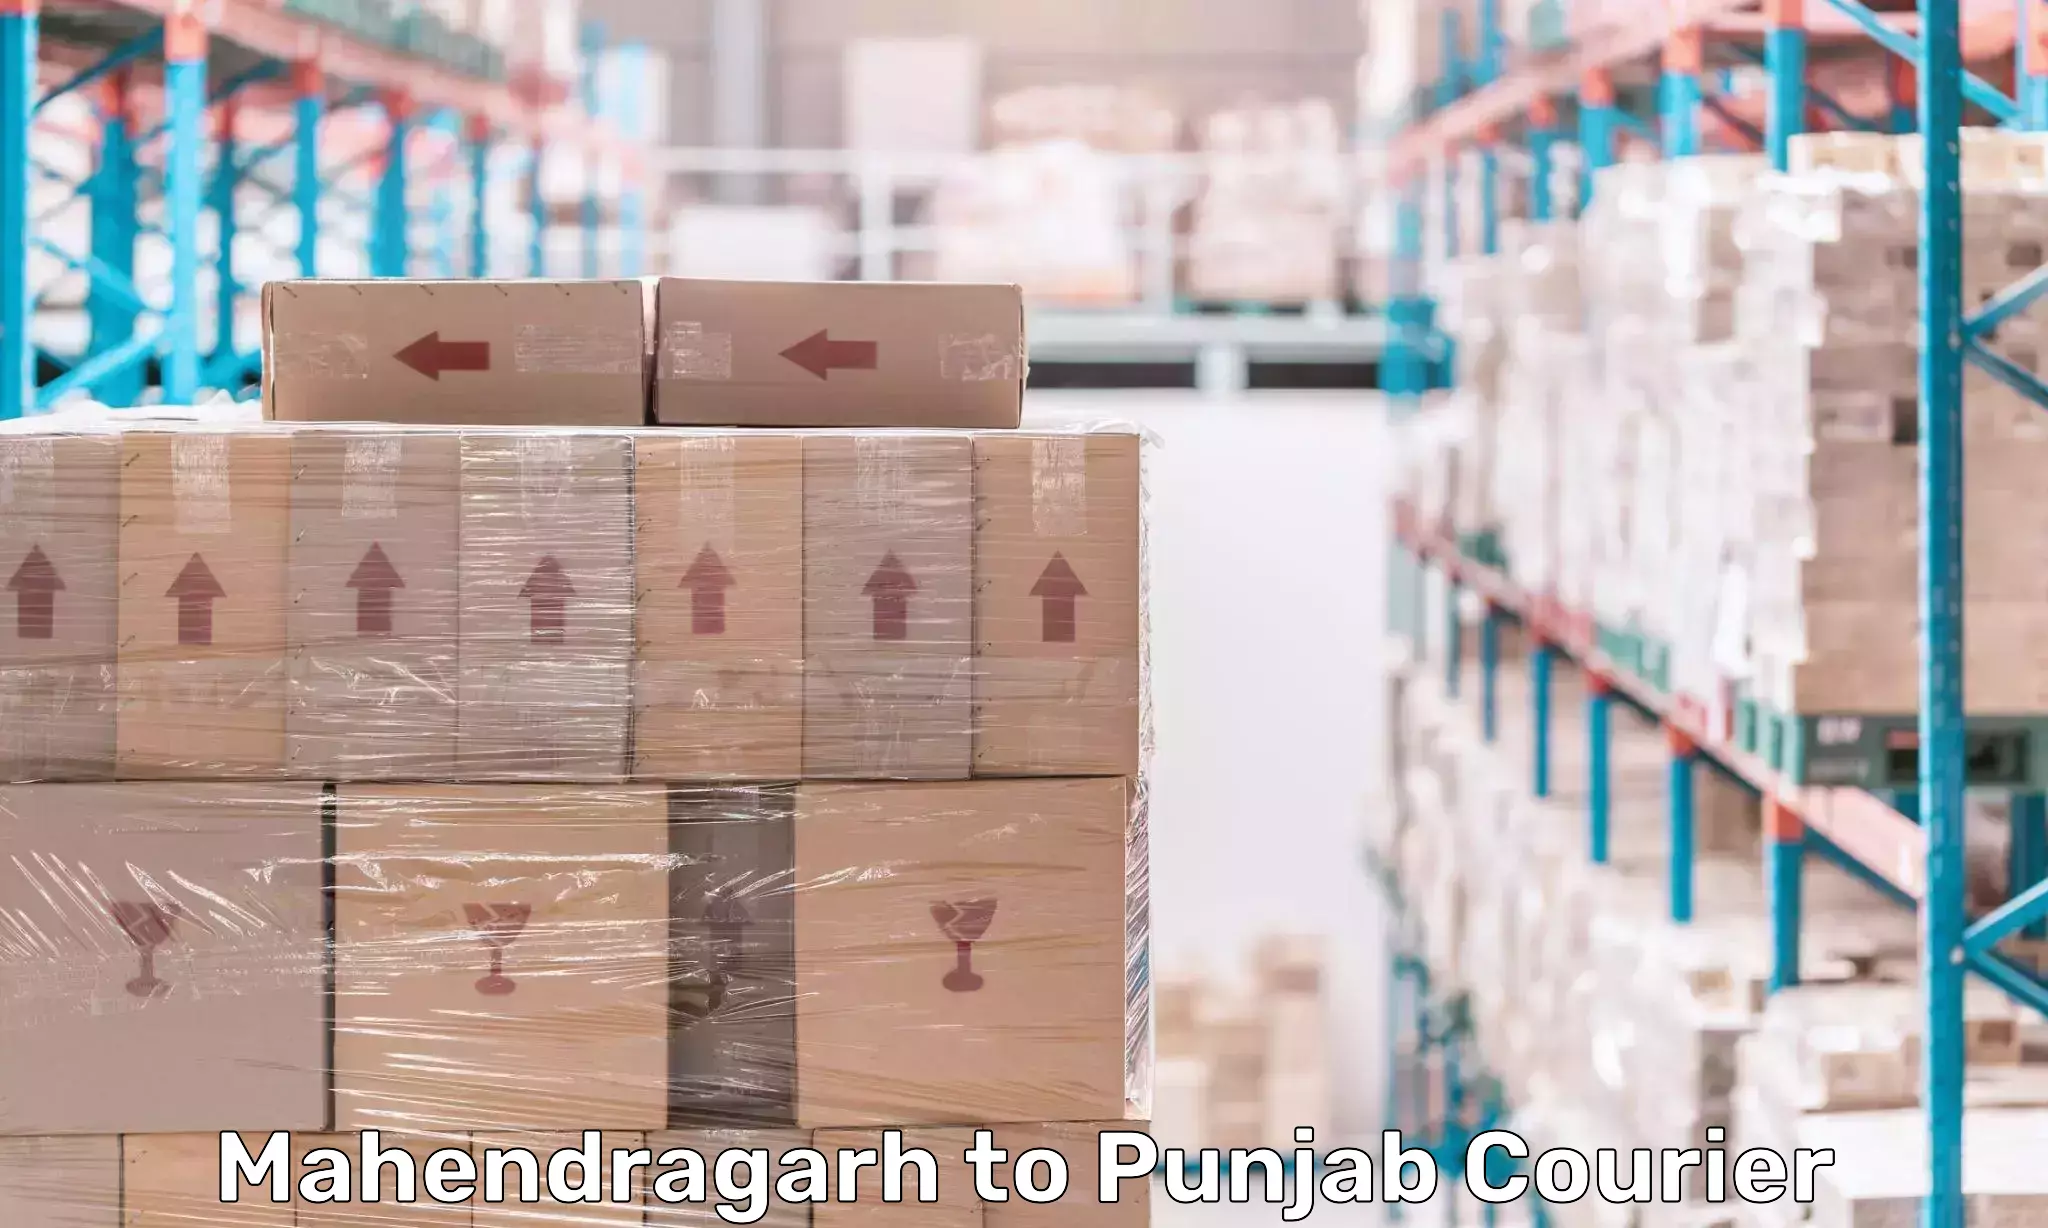 Global courier networks Mahendragarh to Ropar